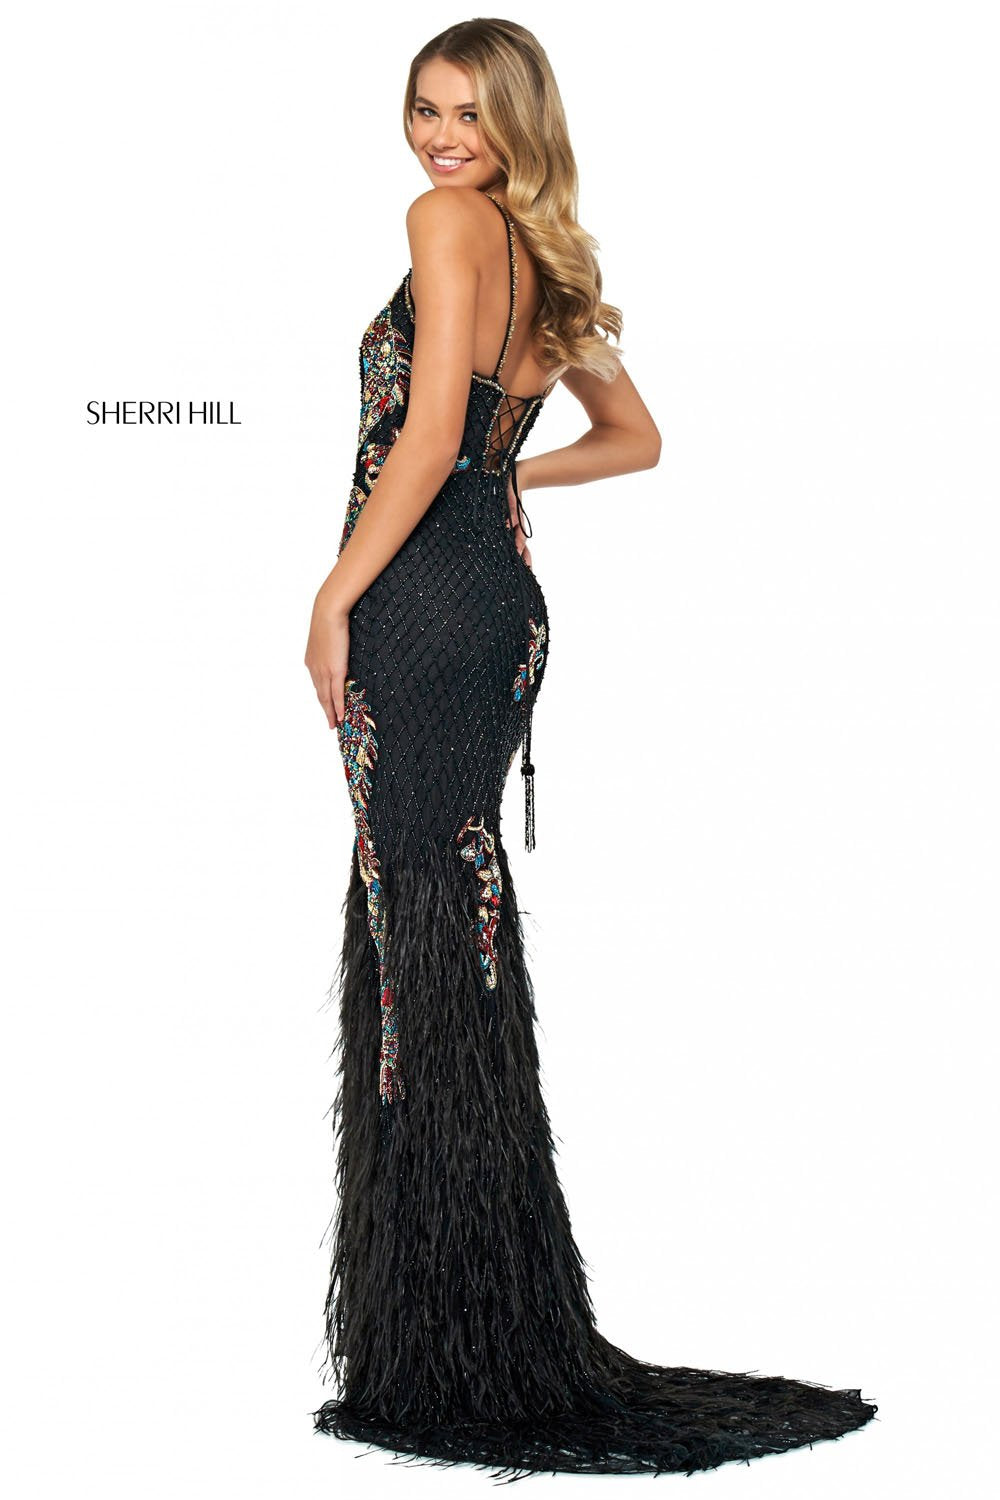 Sherri Hill 53608 dress images in these colors: Nude Silver, Black Multi.